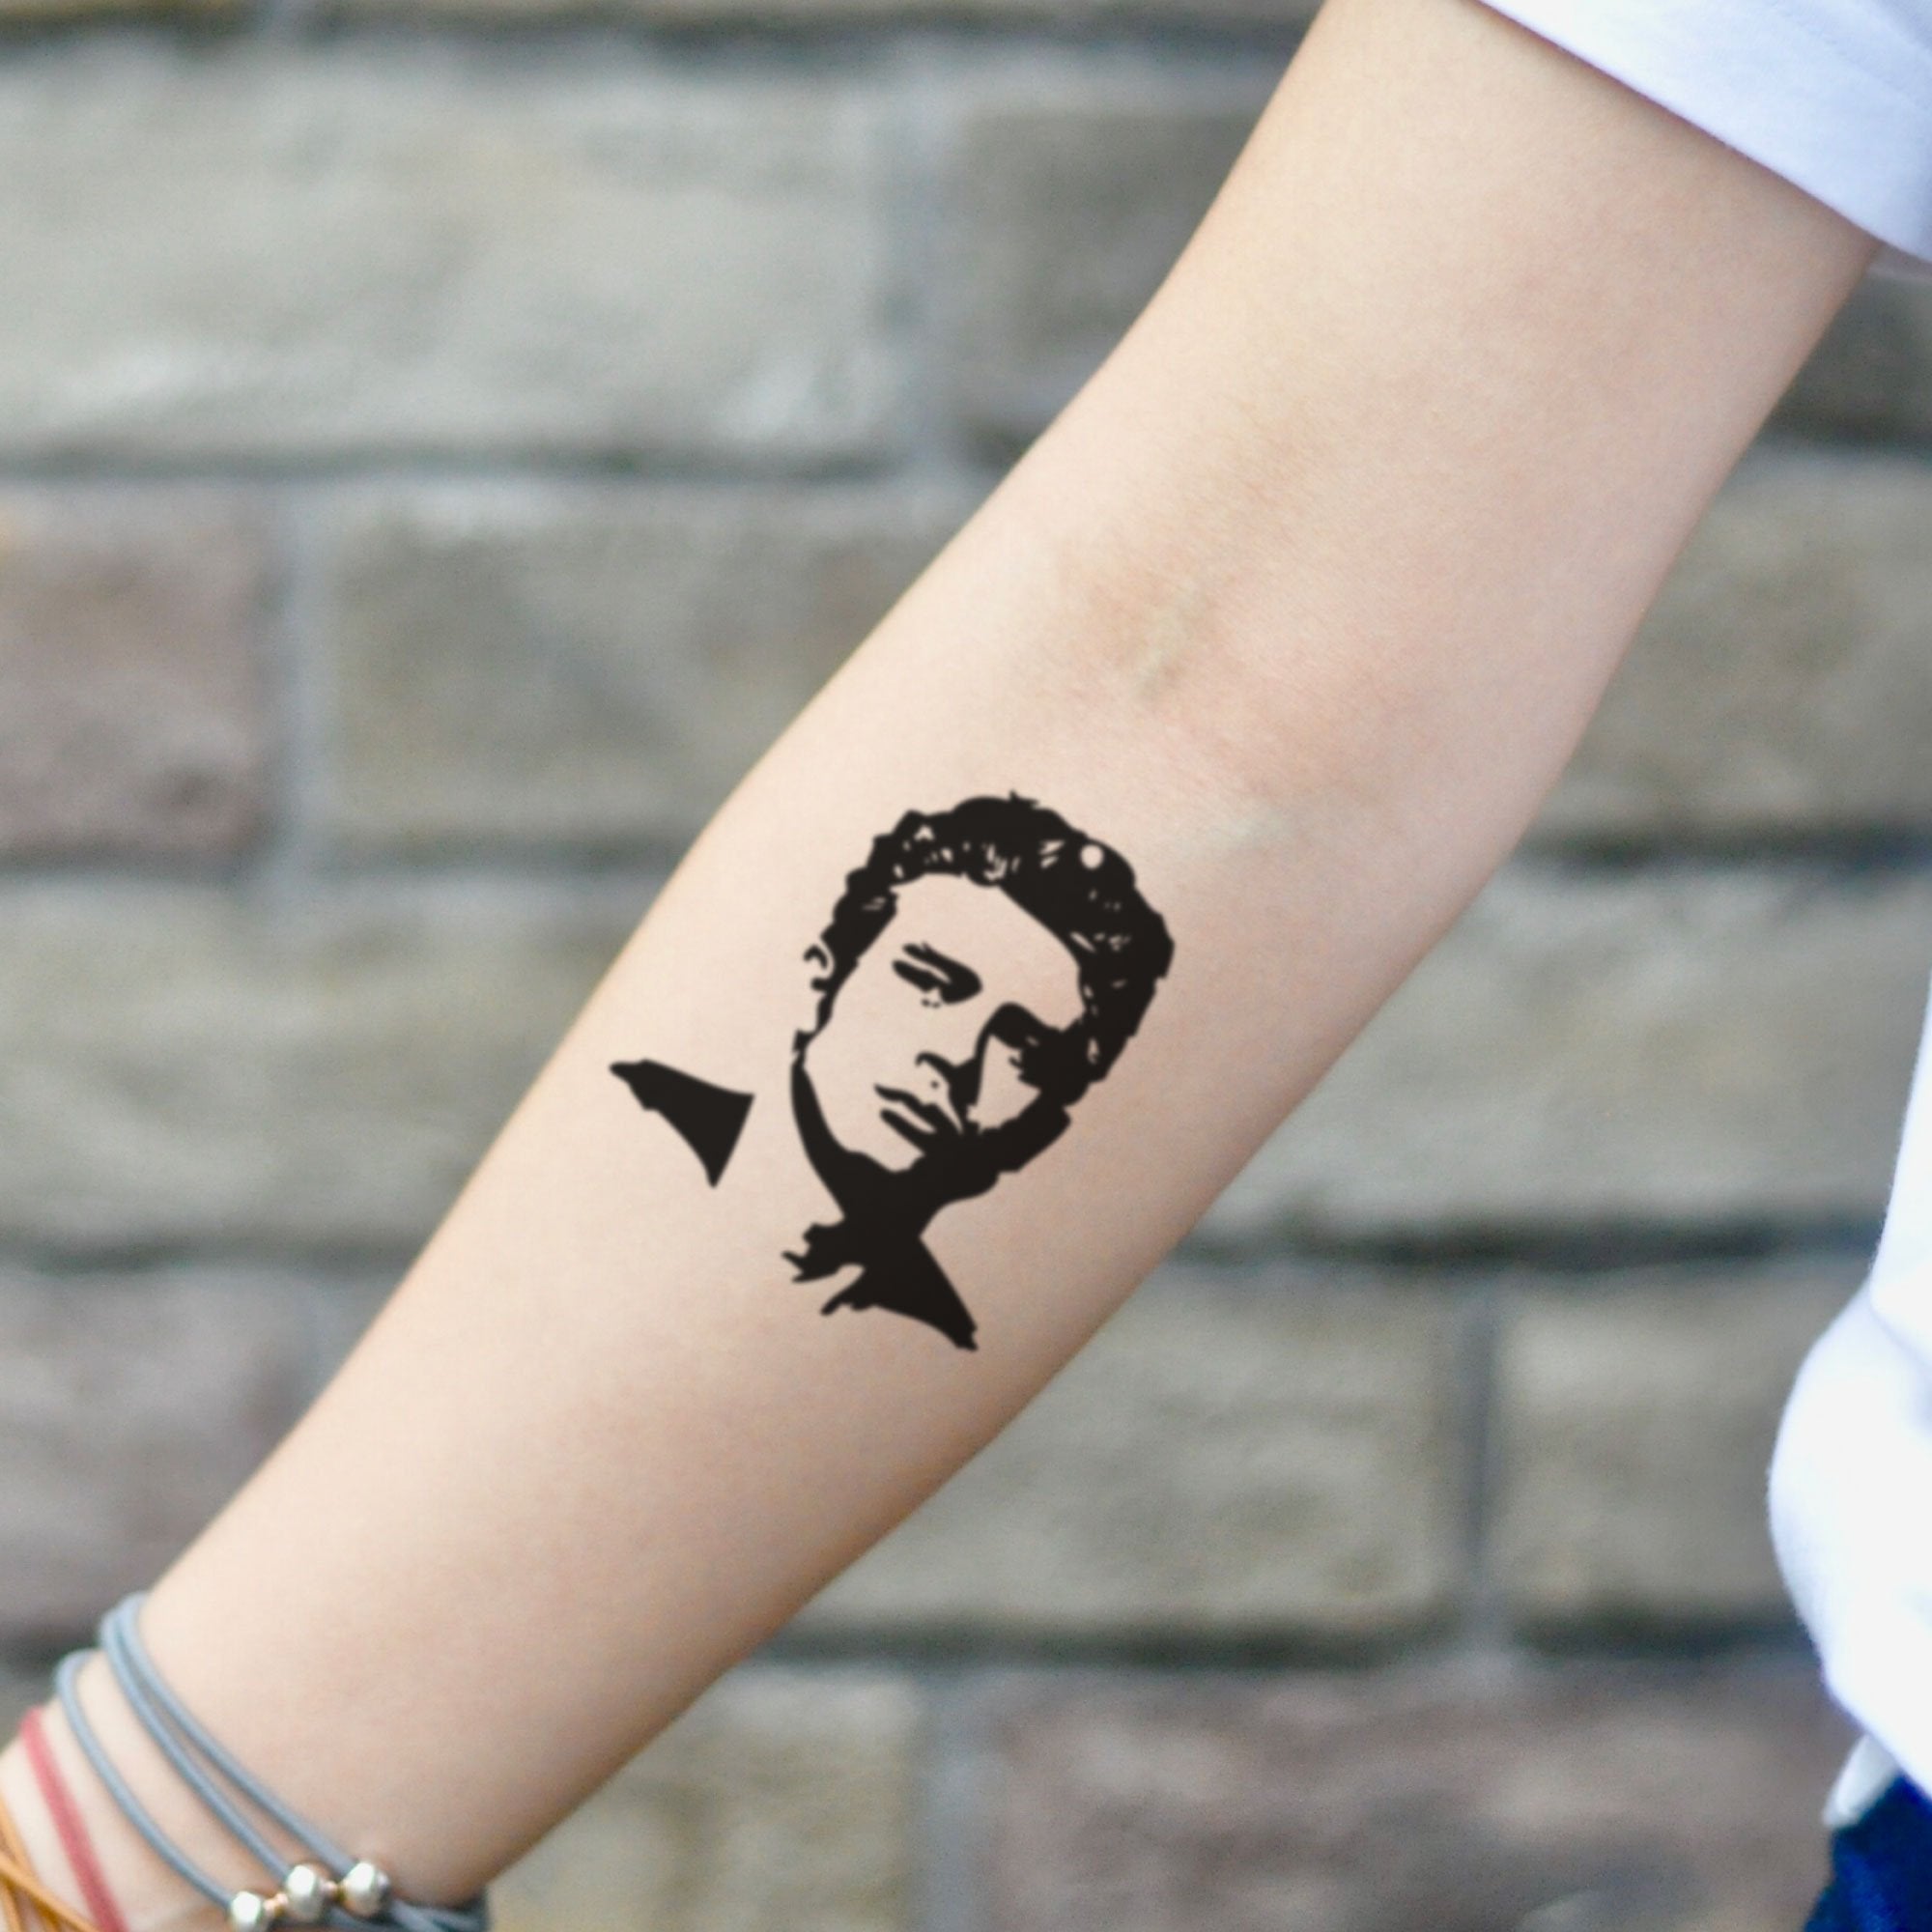 James Dean tattoo quote by PeterVsAll on DeviantArt